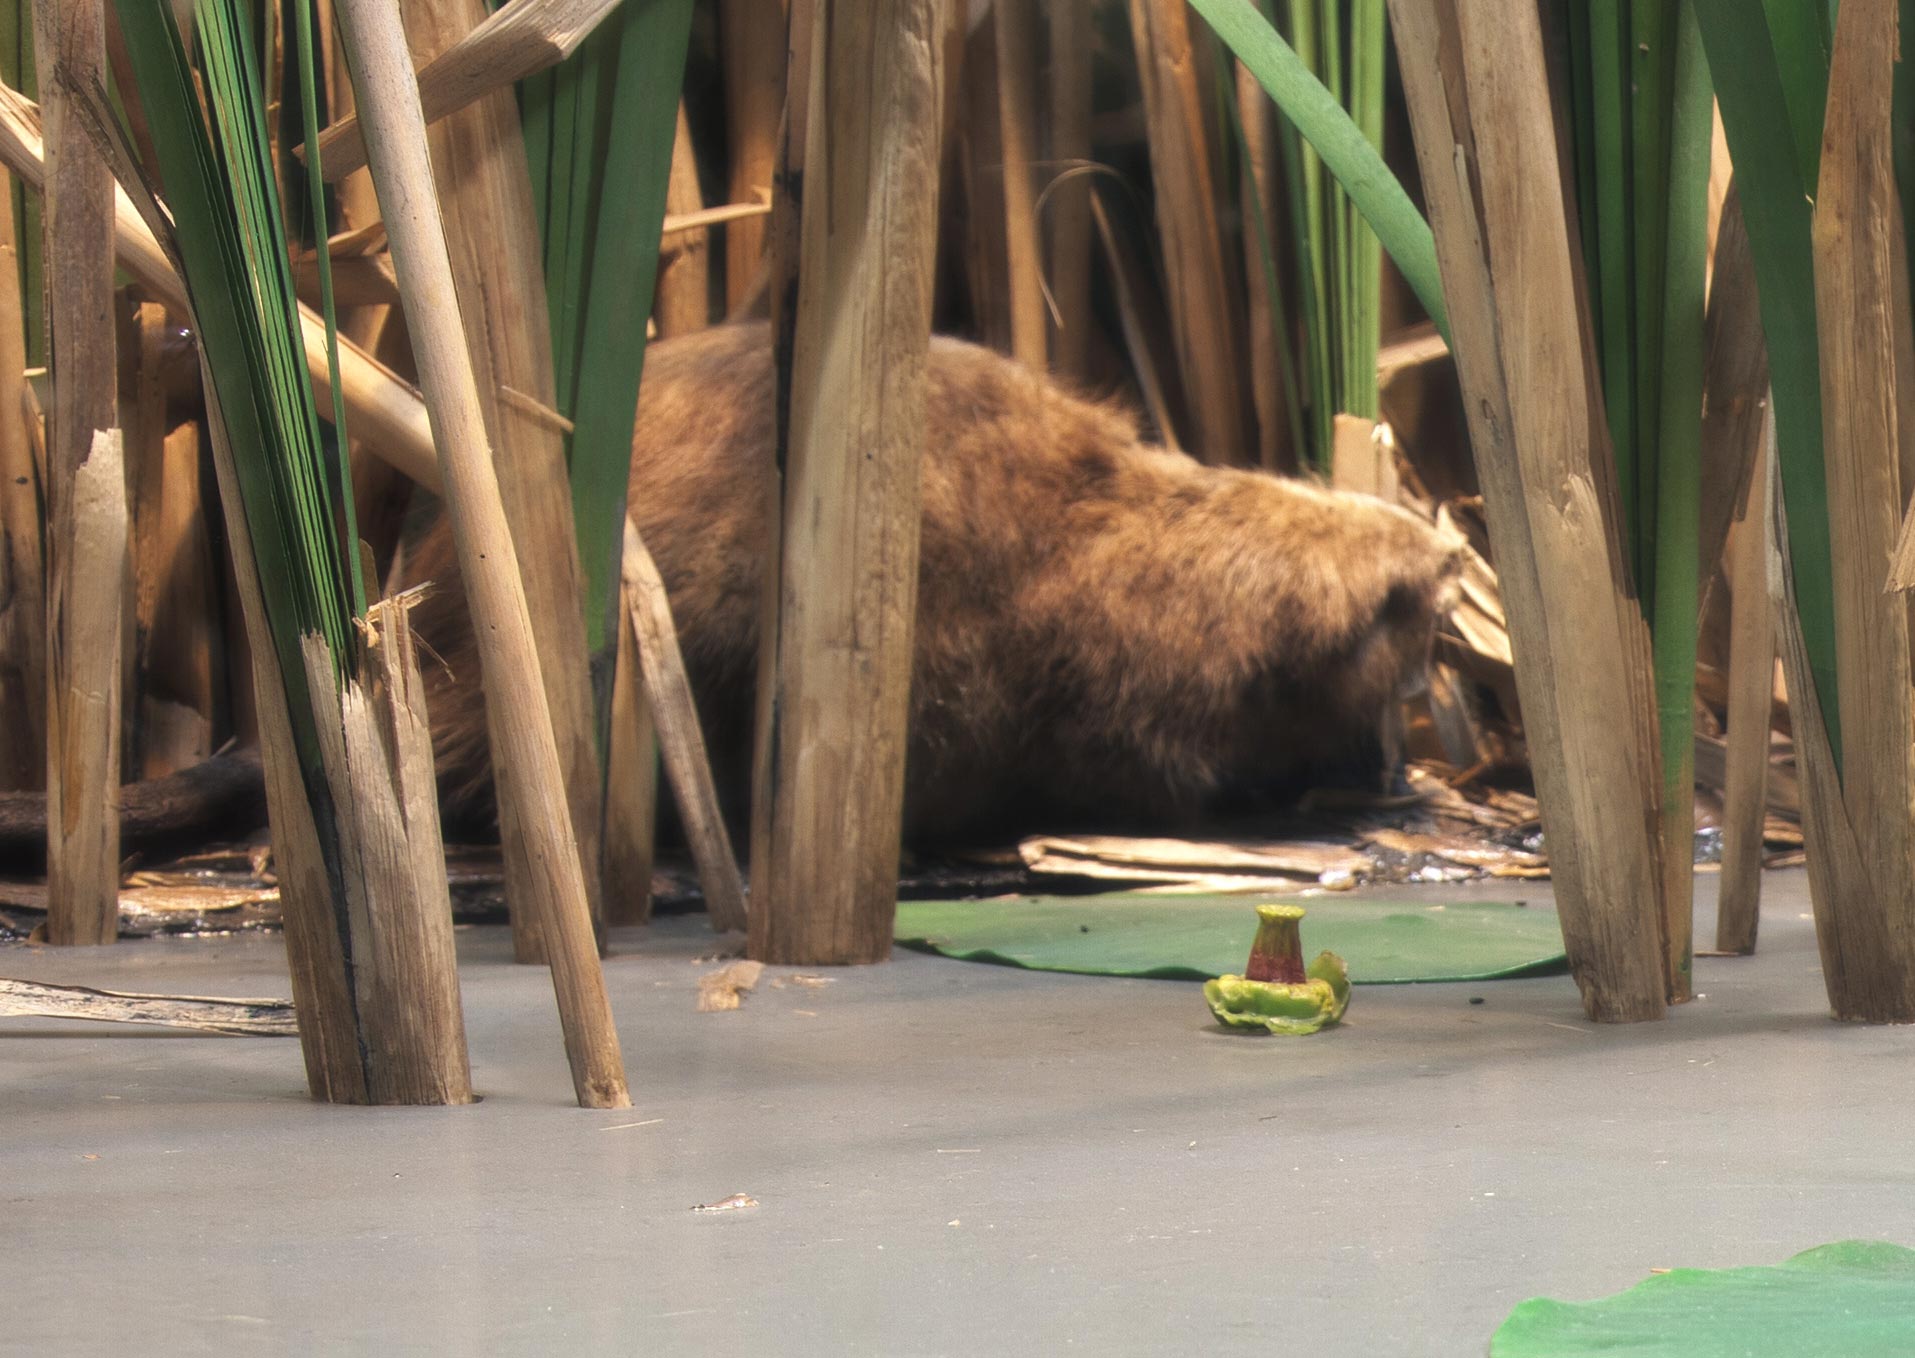 Section of a diorama showing a muskrat on the shore of a lake.